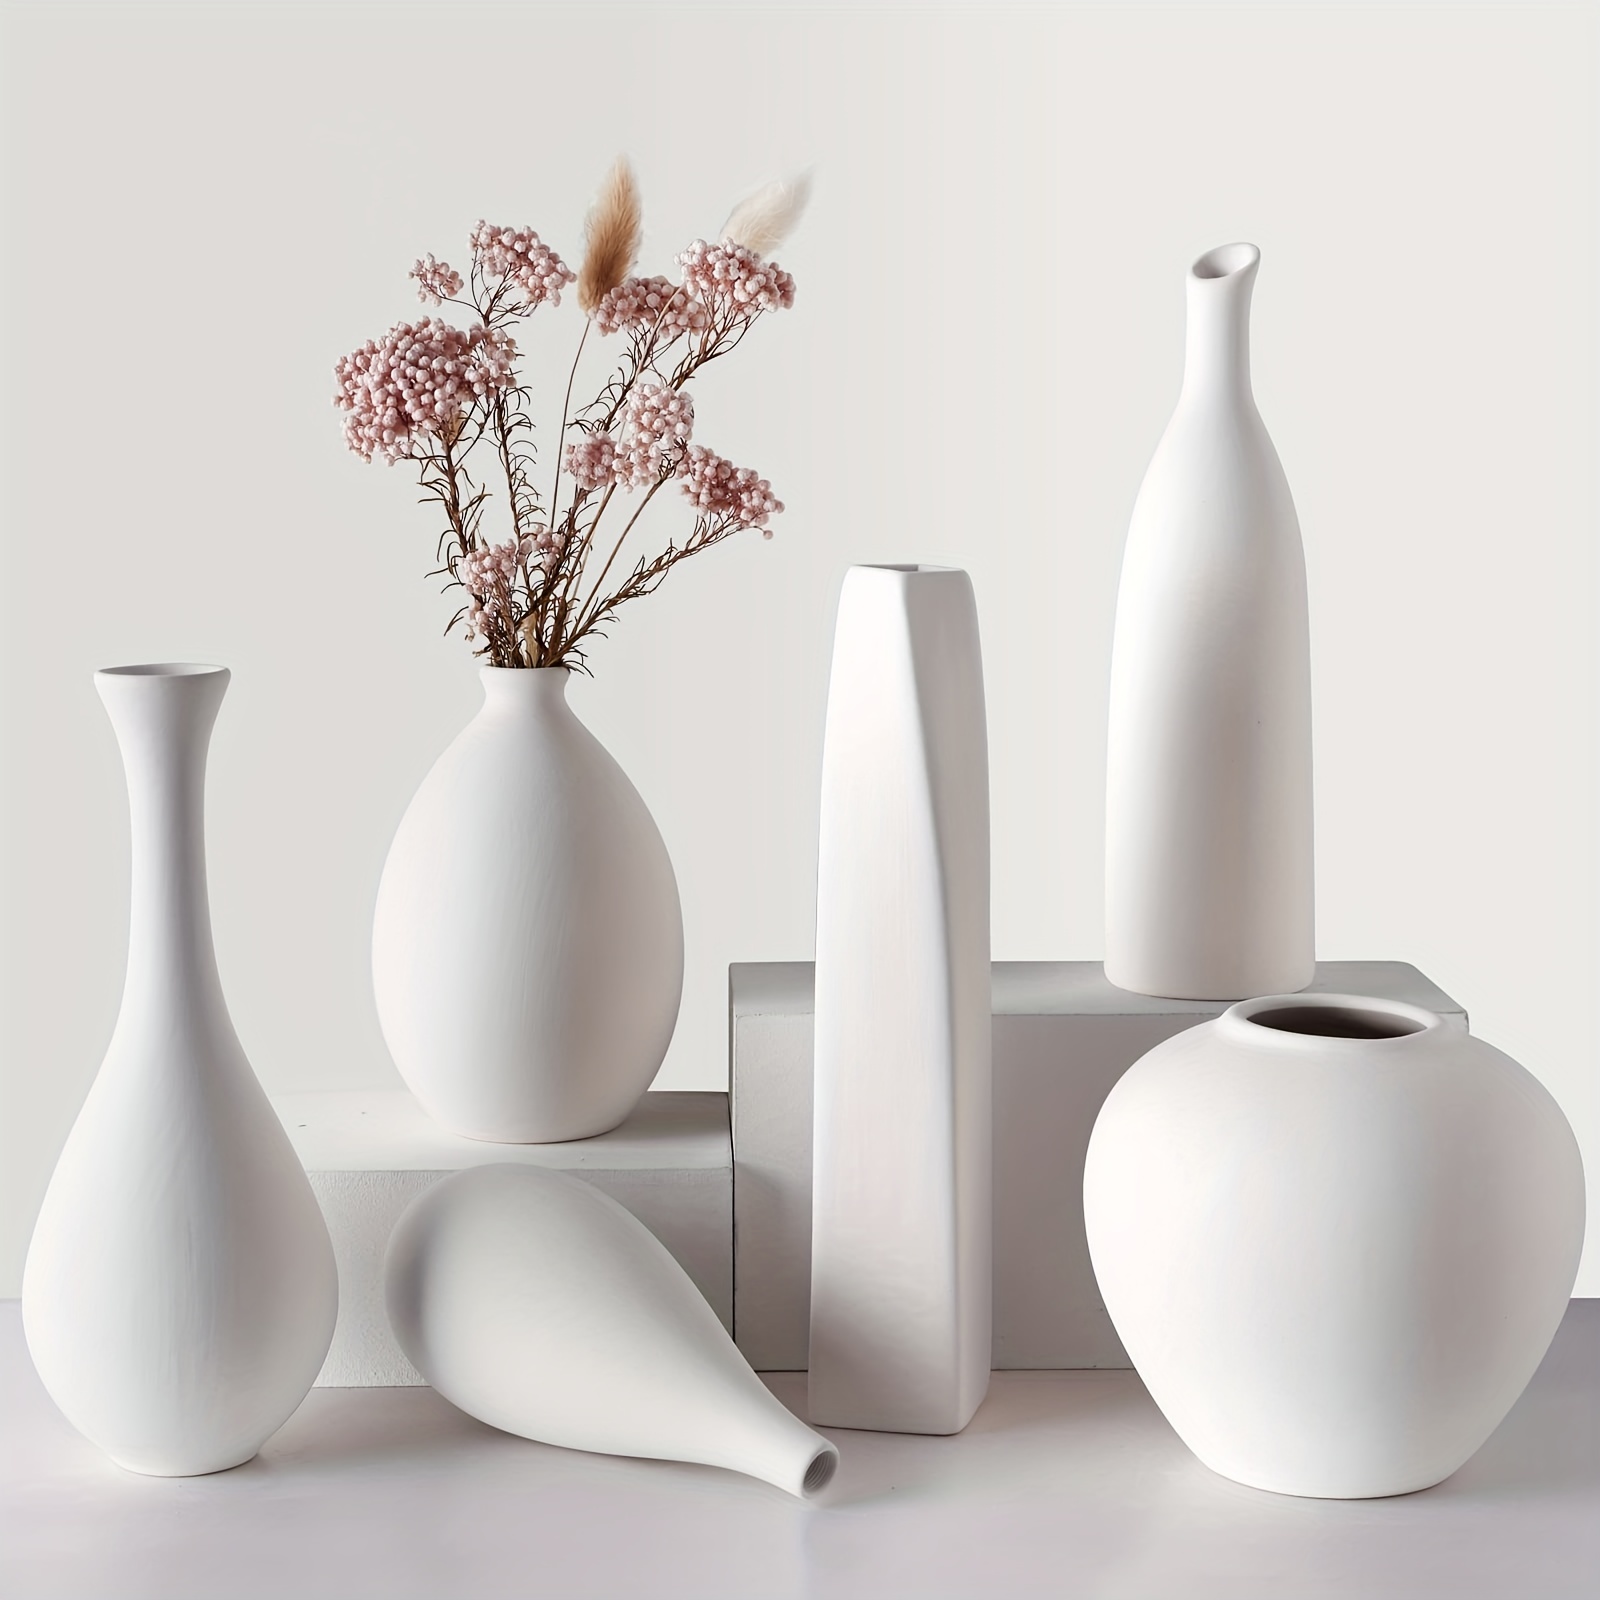 Best Flower Vases to Buy Online: Large and Small Decorative Vases